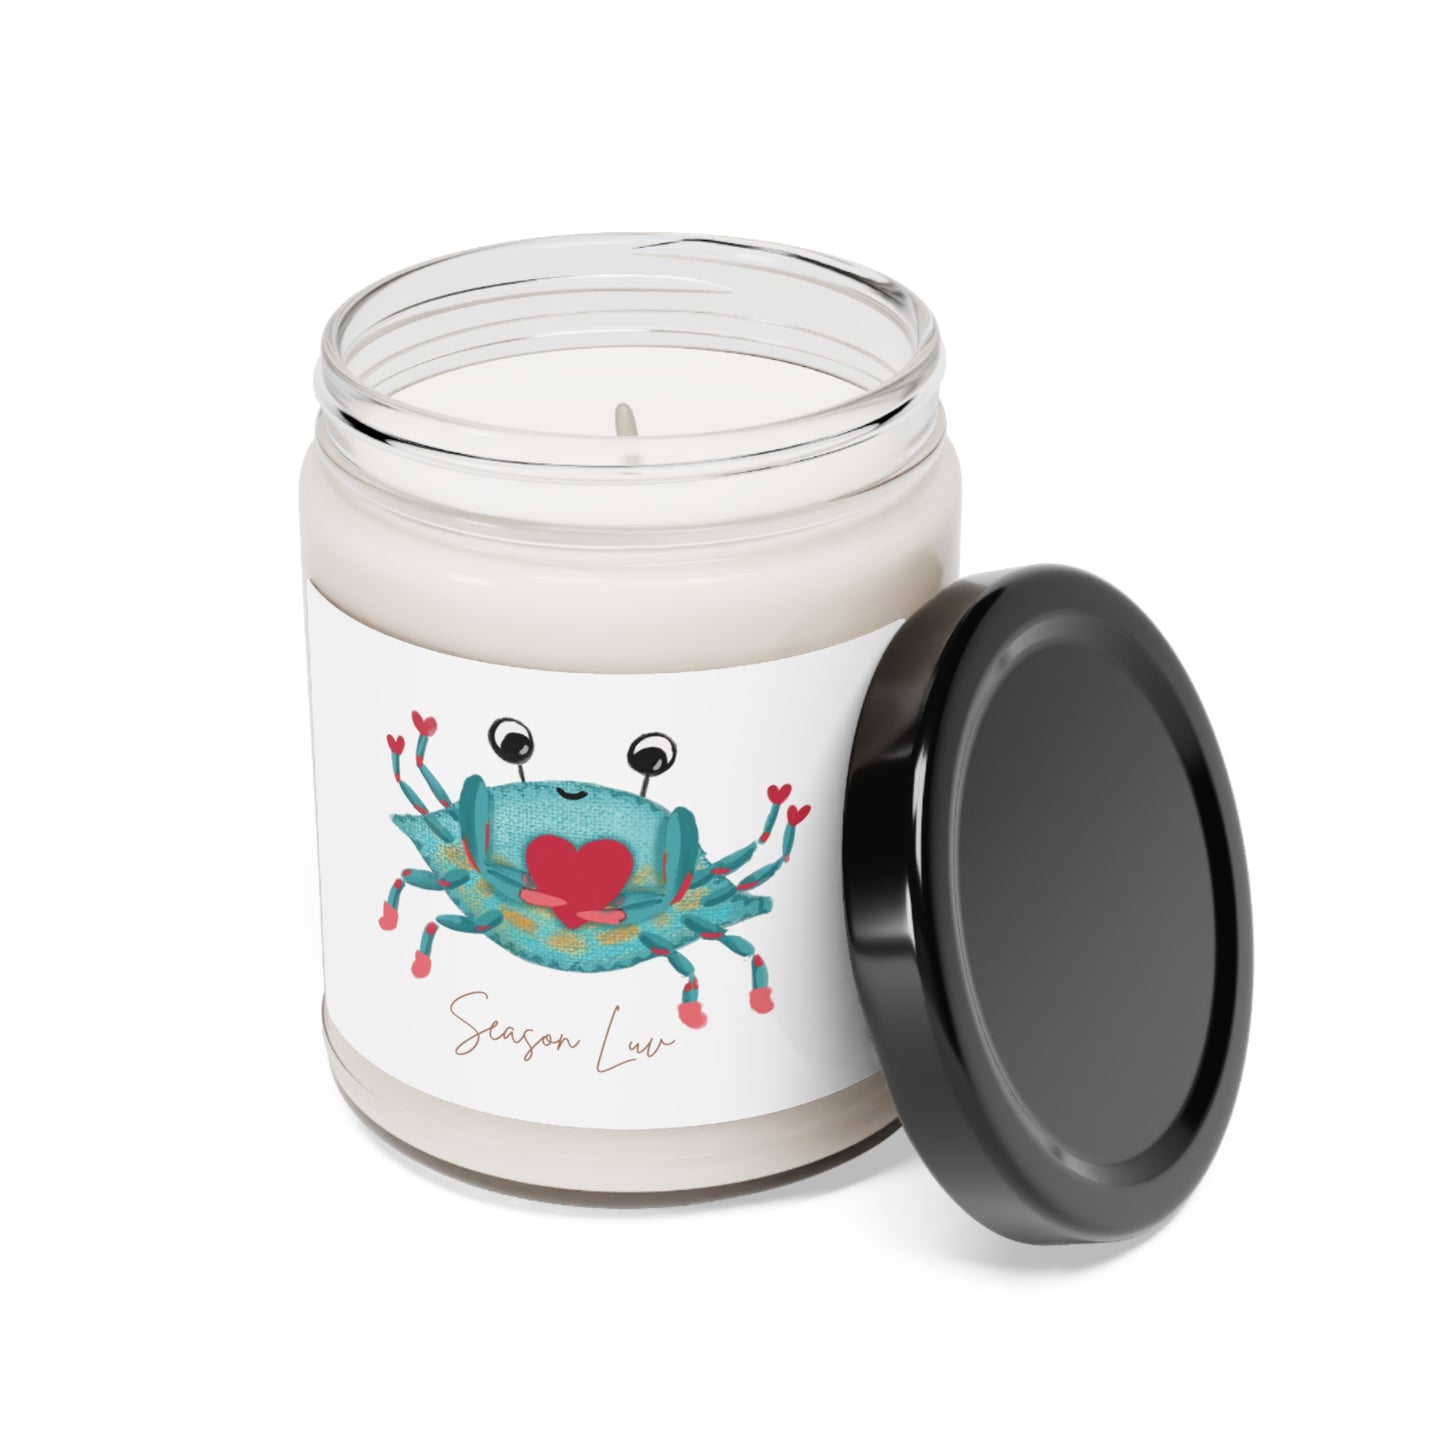 Blue Crab in Love Scented Soy Candle, 9oz